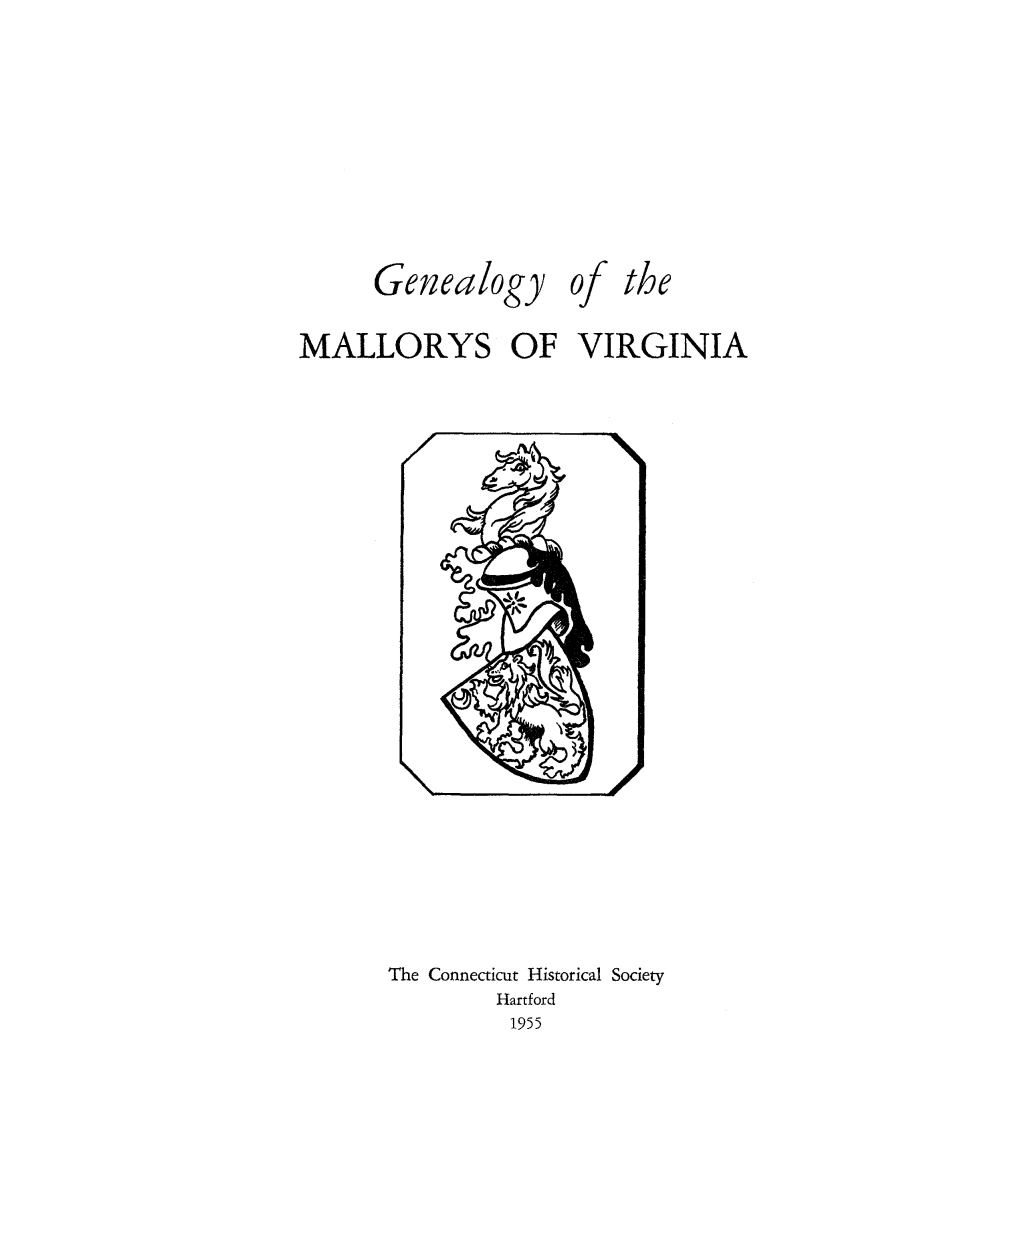 Genealogy of the MALLORYS of VIRGINIA